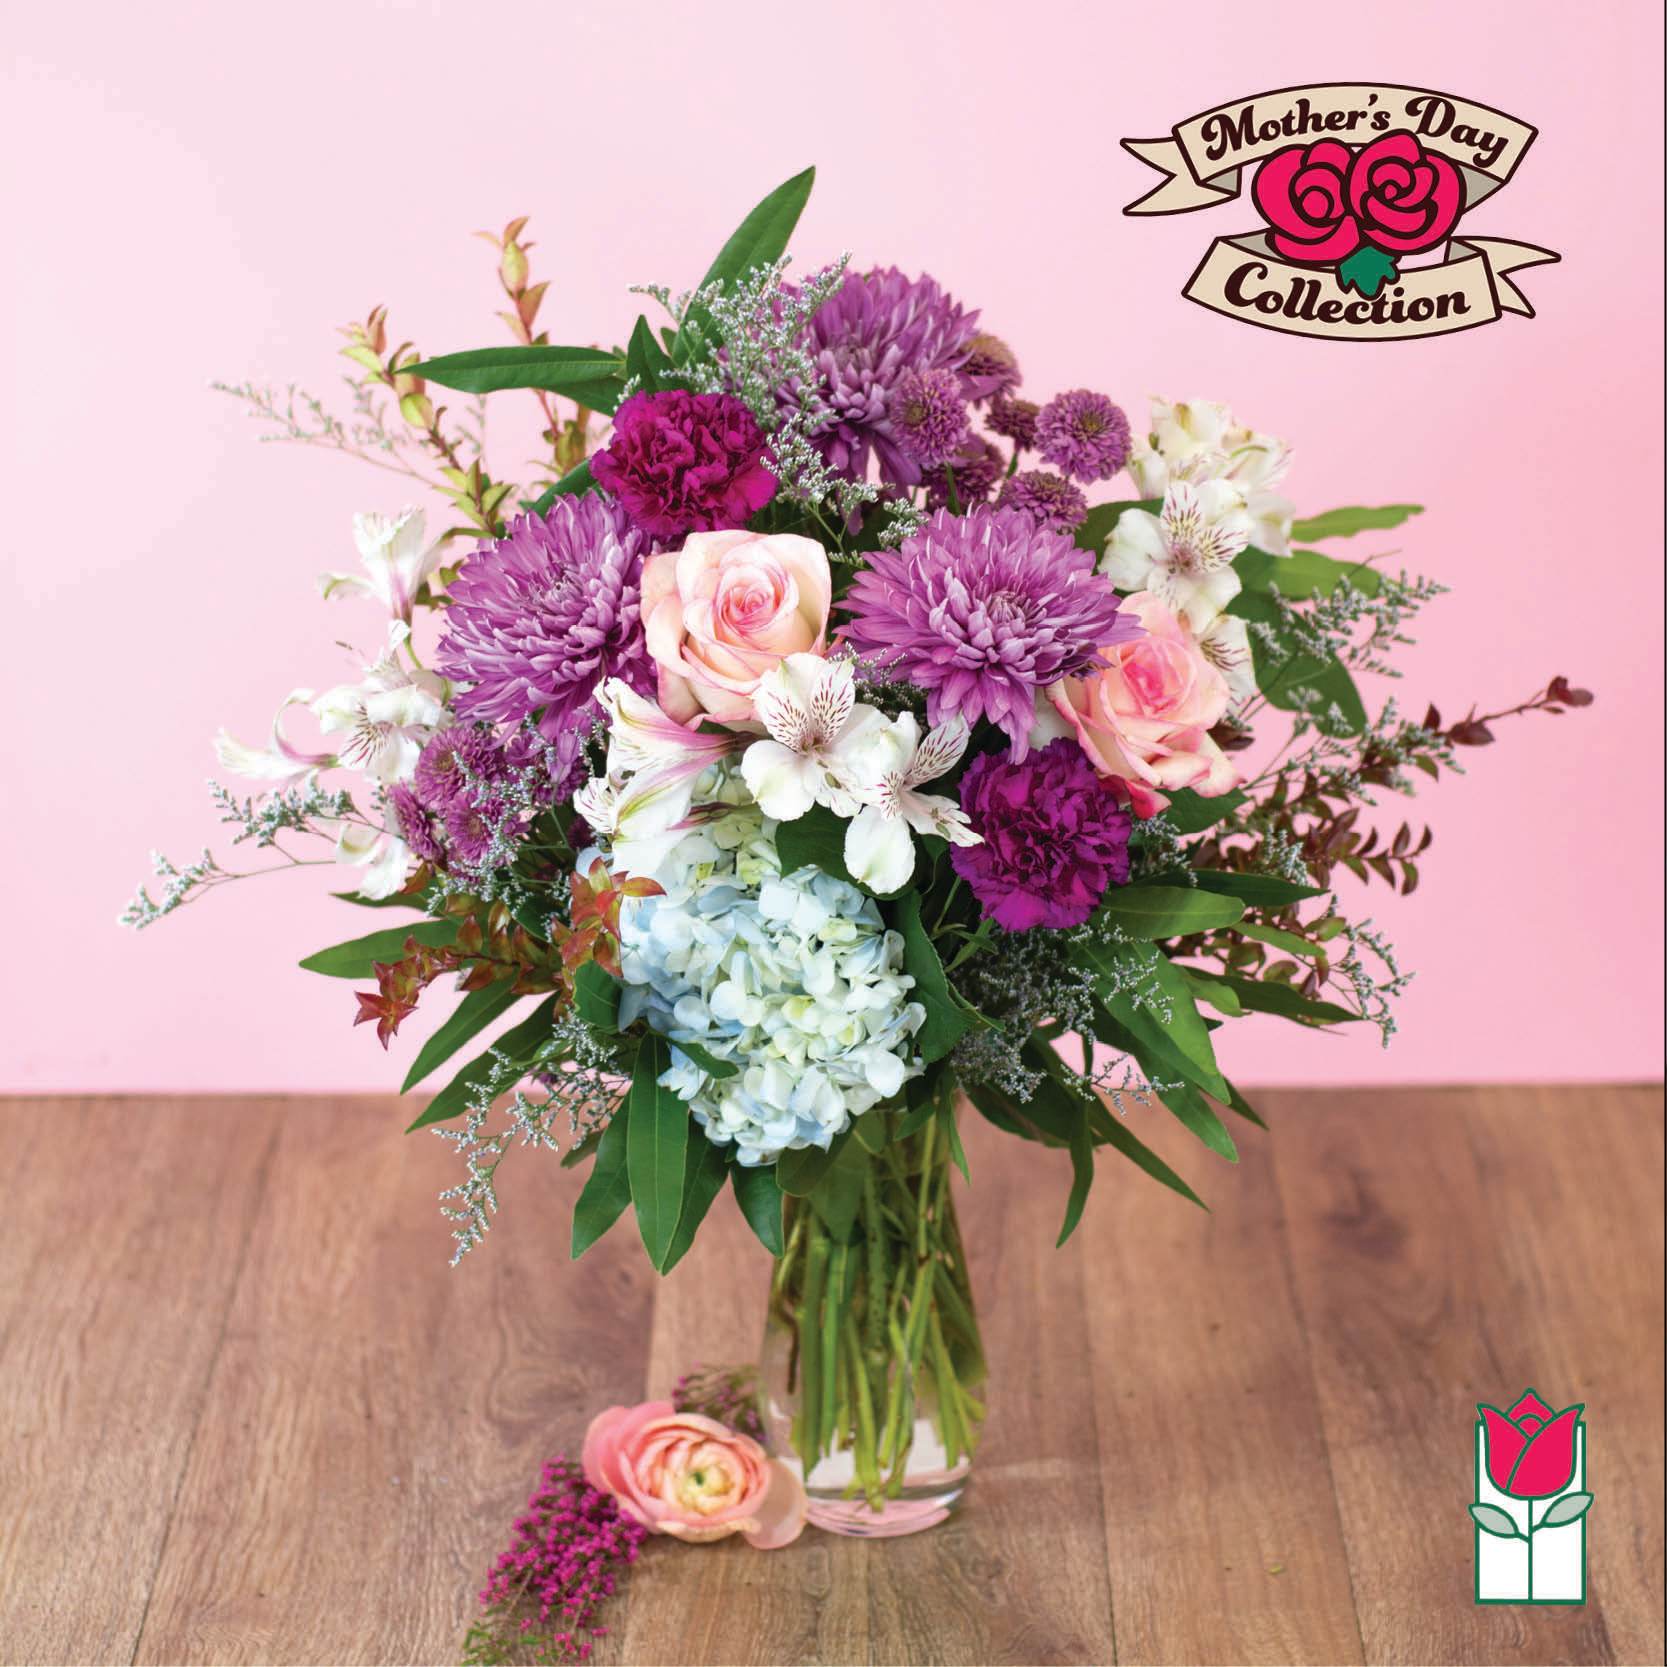 Beretania's Amethyst Bouquet (Seasonal Varieties Vary) - The Beretania Florist Amethyst bouquet is a stunning floral arrangement that features a captivating blend of seasonal mixed garden flowers in soft, delicate hues. This bouquet is expertly arranged in a chic glass vase and includes premium blooms such as lavender cremone, pink roses, hydrangea, alstroemeria, and other exquisite flowers that perfectly complement each other. The result is a breathtaking display of beauty and elegance that is sure to impress. This popular item is available for delivery throughout the Honolulu area, making it easy to surprise someone special or brighten up your own space. With its timeless appeal and sophisticated charm, the Beretania Florist Amethyst bouquet is the perfect way to express your feelings and show your appreciation. Order yours today and experience the joy of fresh, beautiful flowers from Beretania Florist.